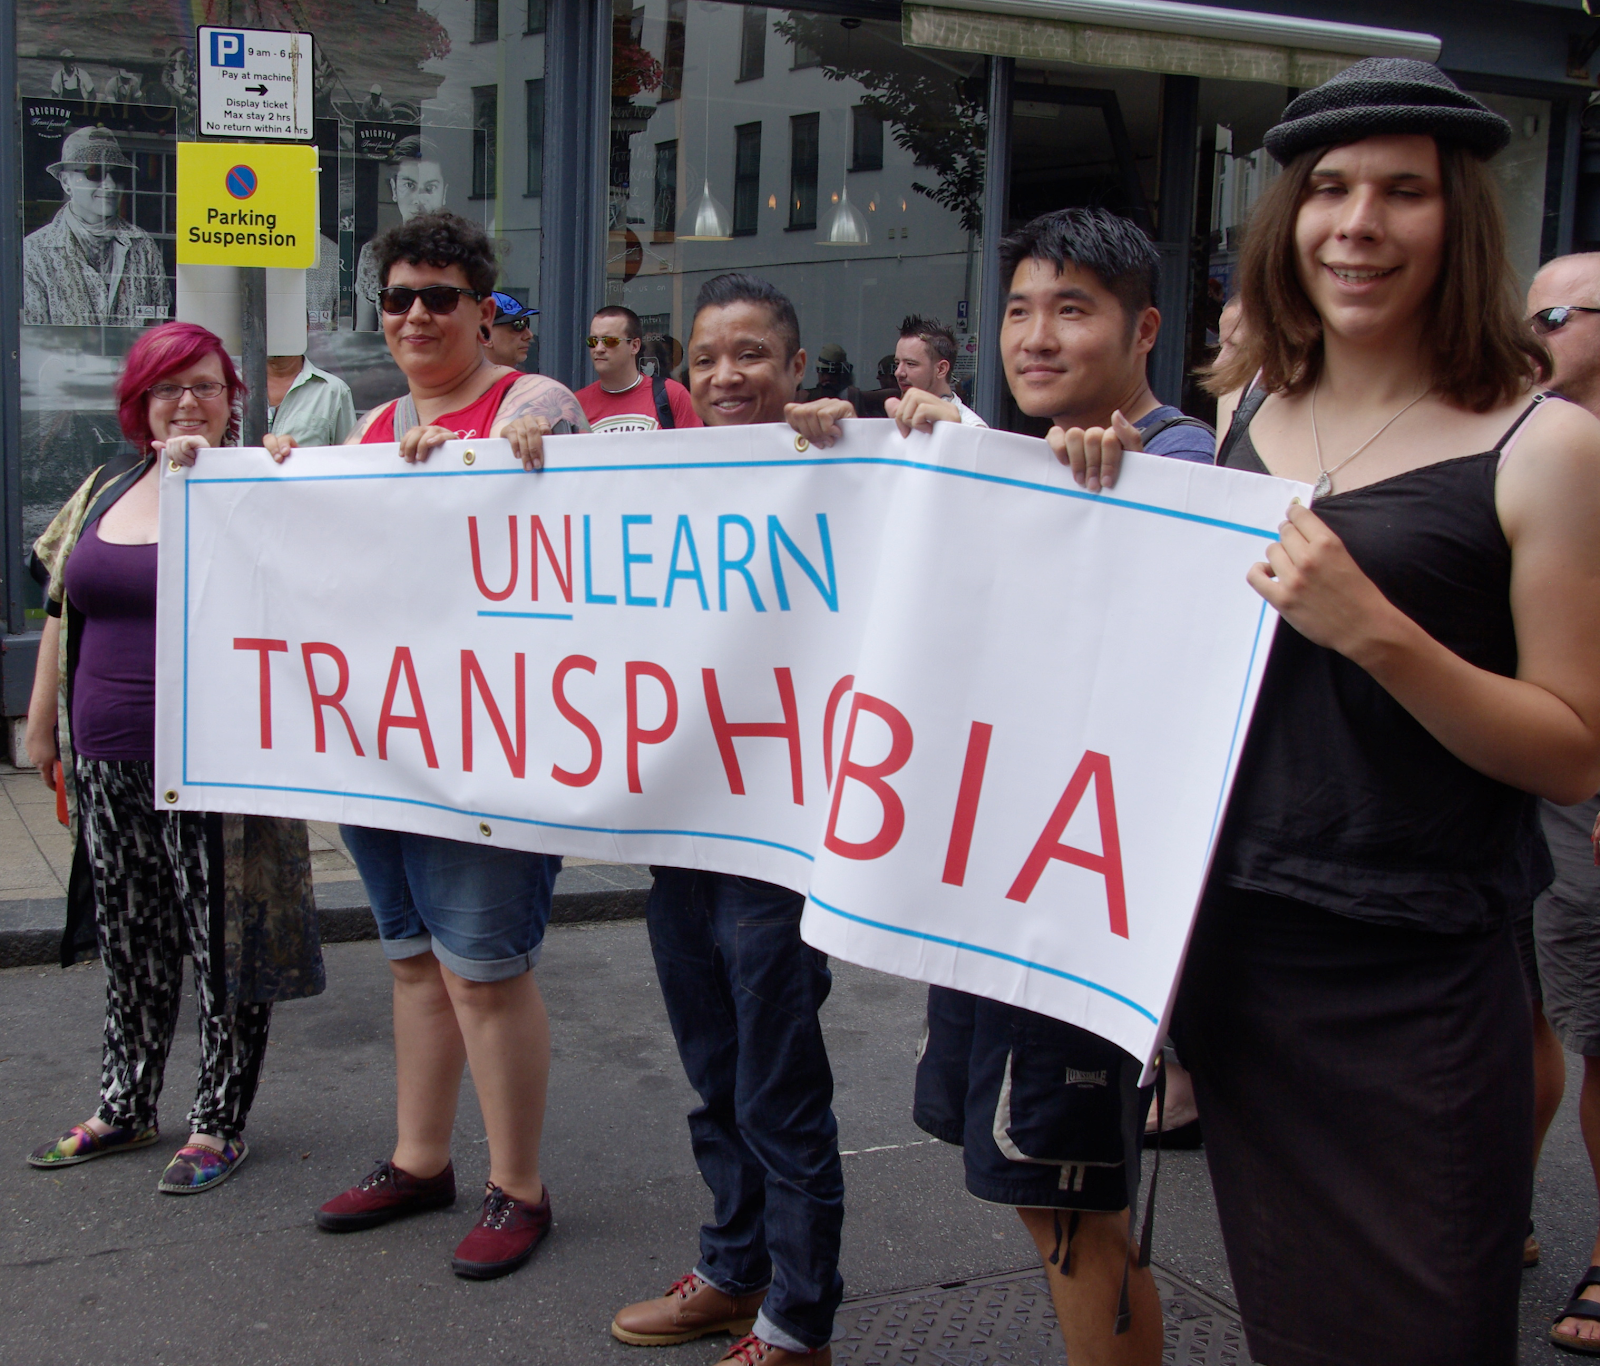 A group of people holding a banner that says "UNLEARN TRANSPHOBIA."